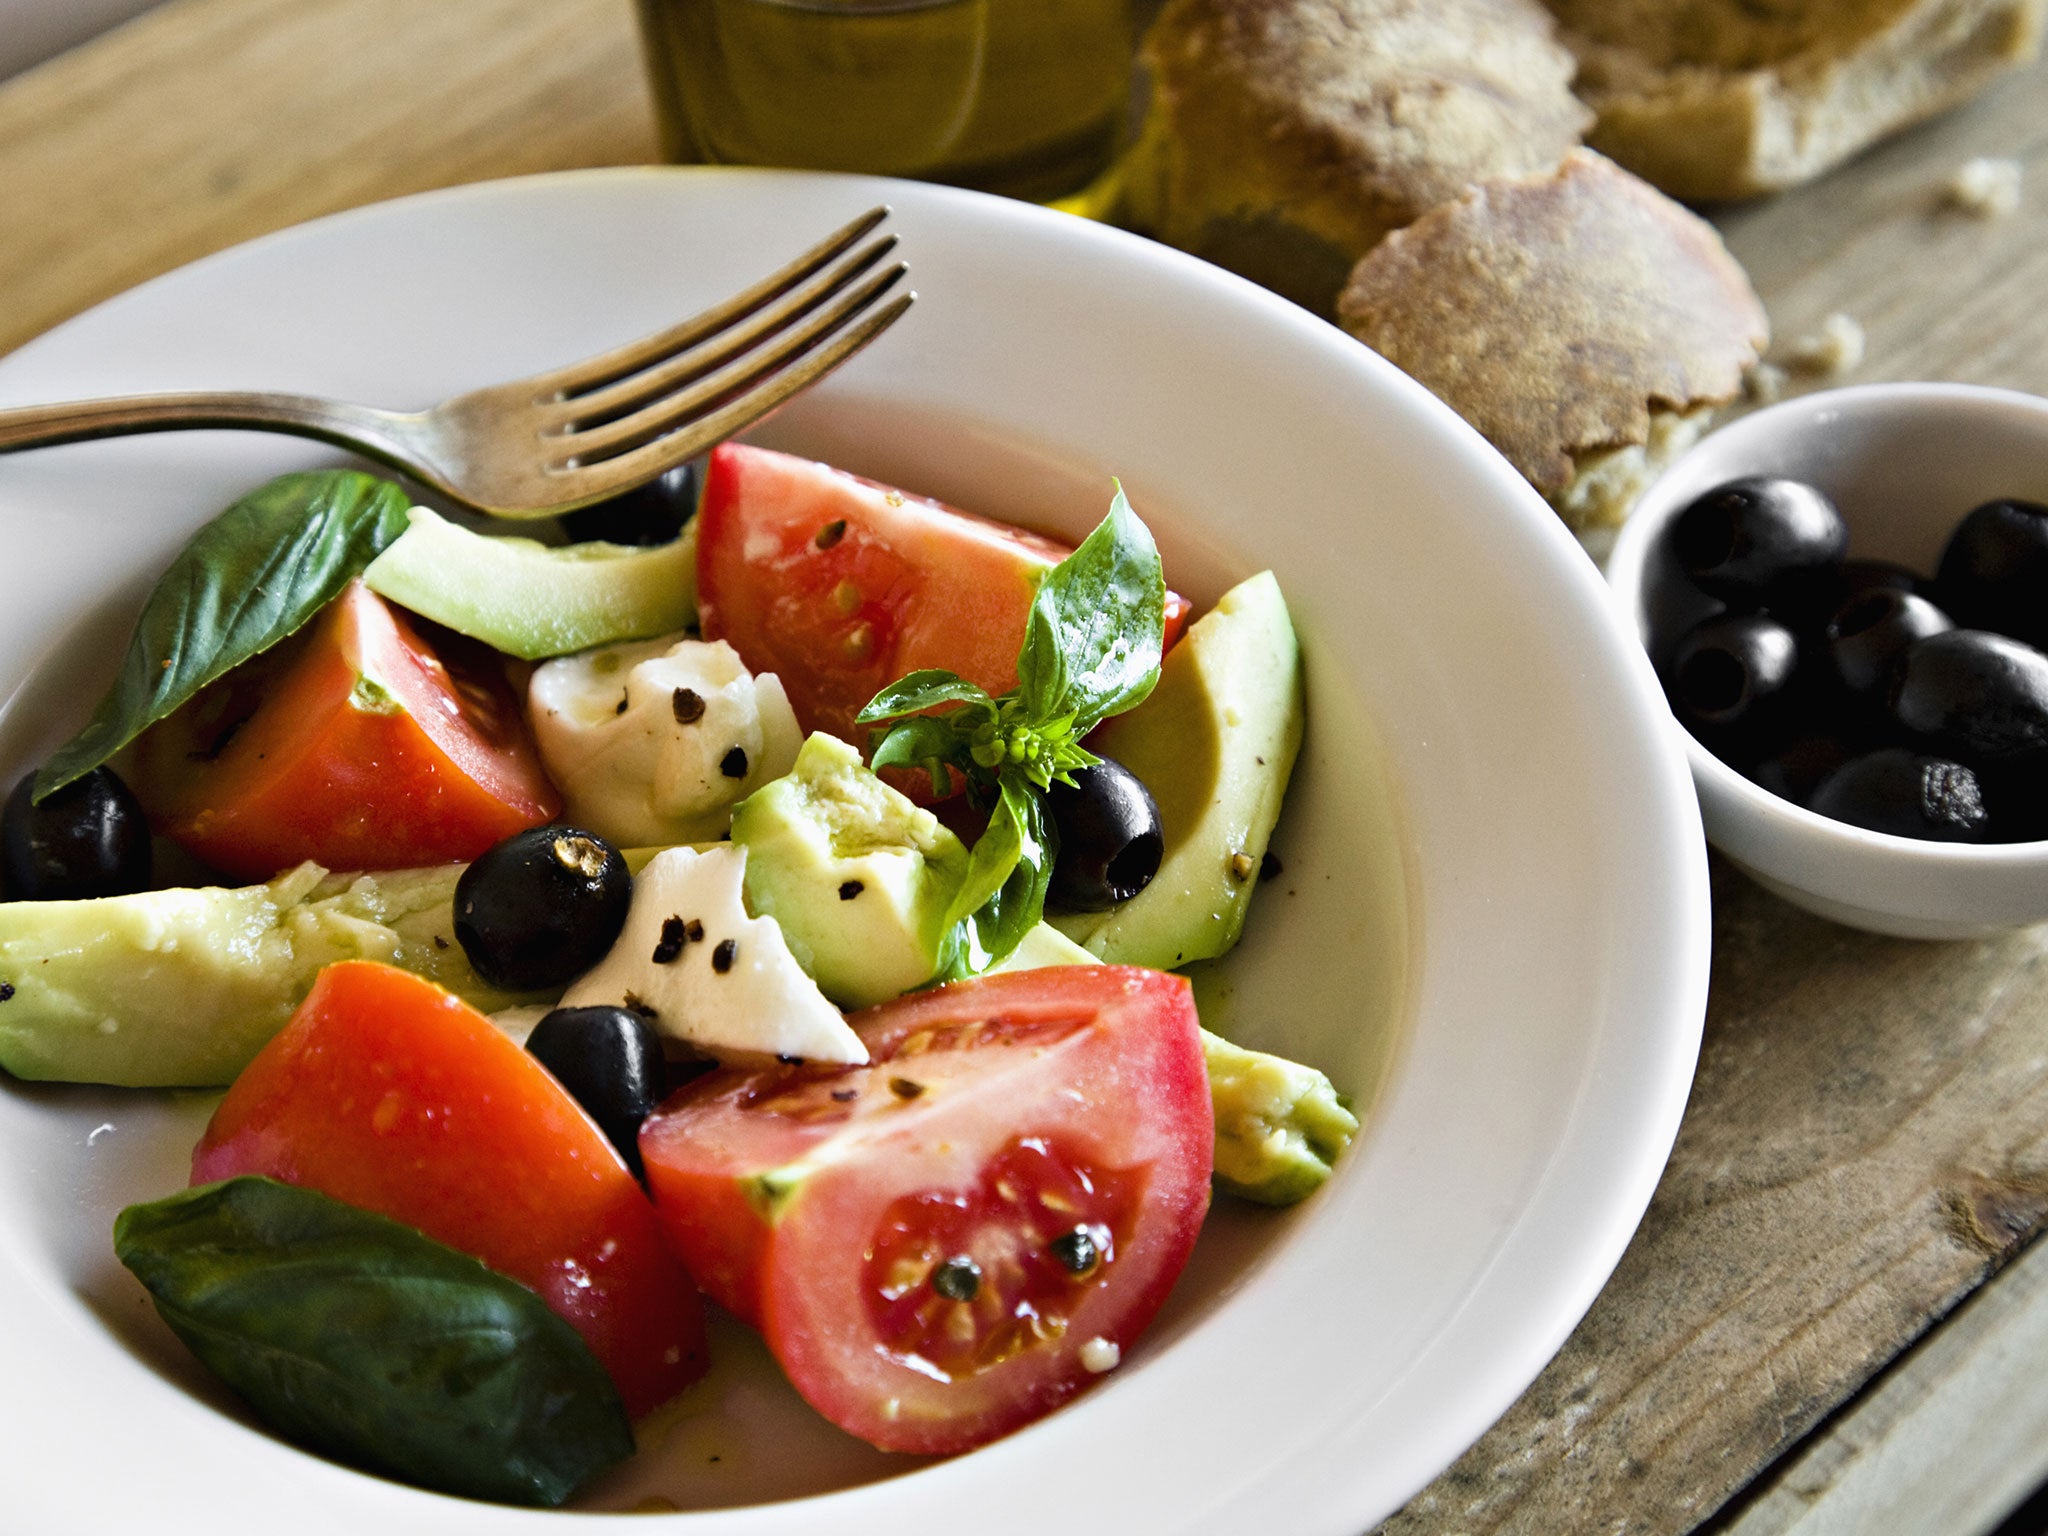 Eating a Mediterranean diet could help with cognitive functioning